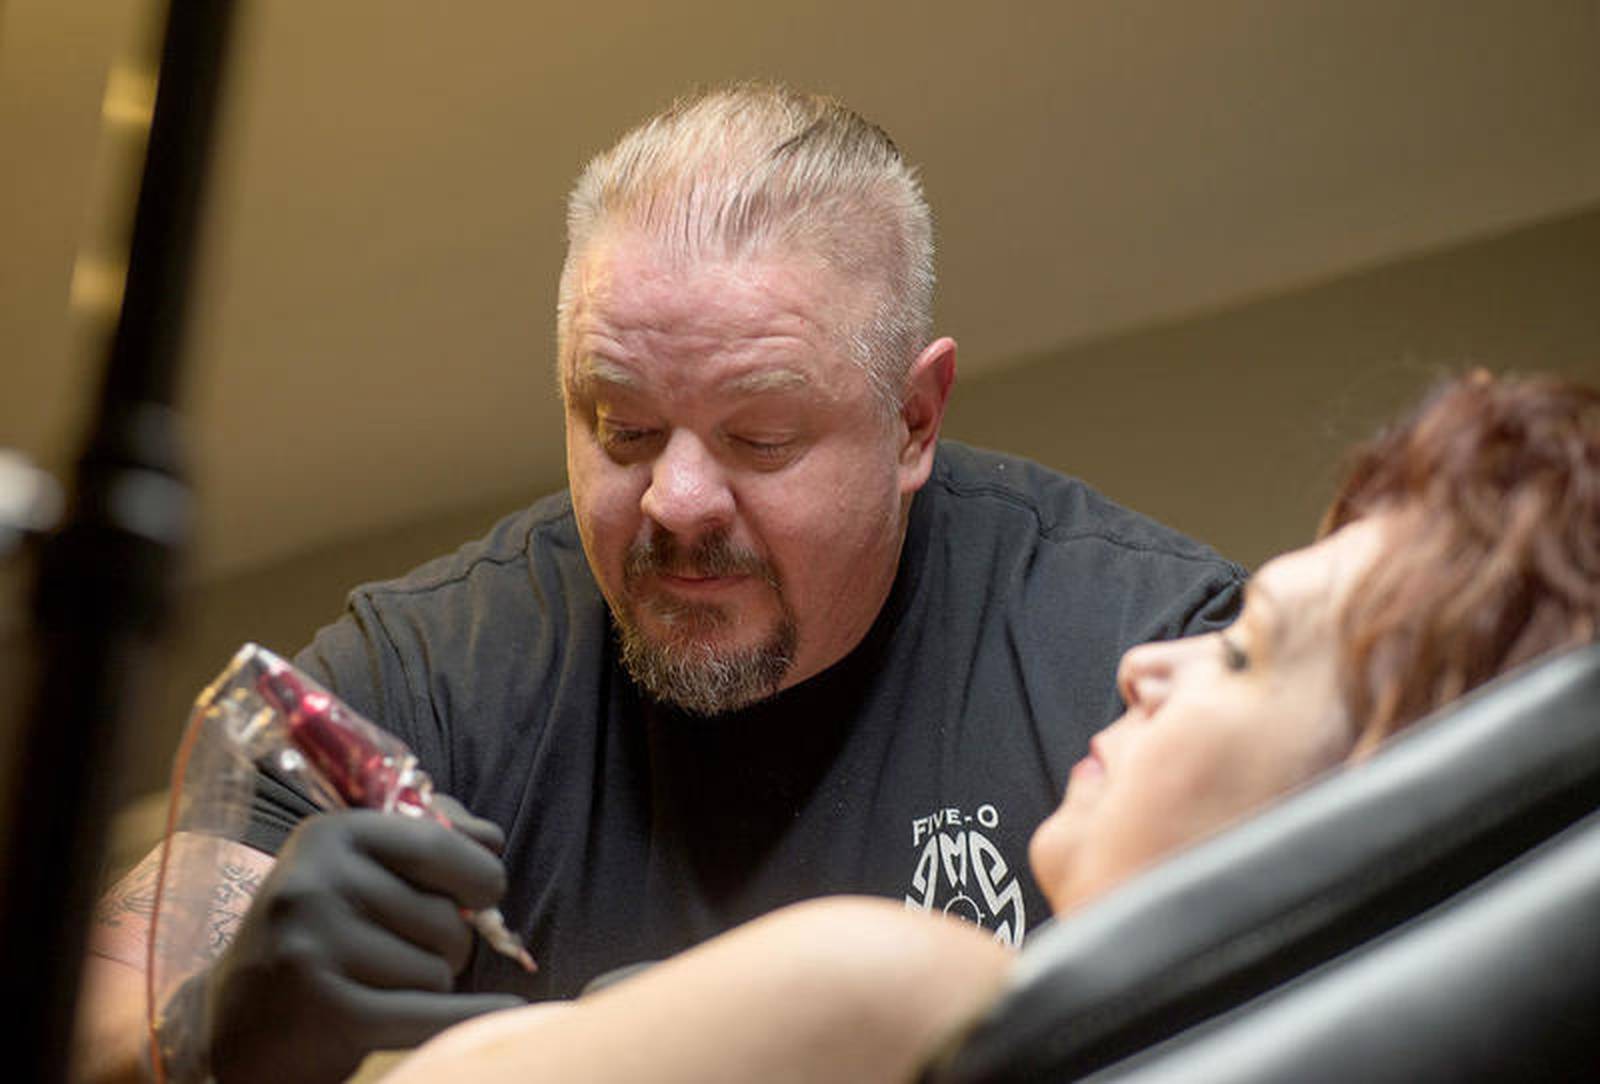 Make Me Feel Normal Elburn Tattoo Shop Offers 3d Nipple Tattoos To Breast Cancer Survivors 